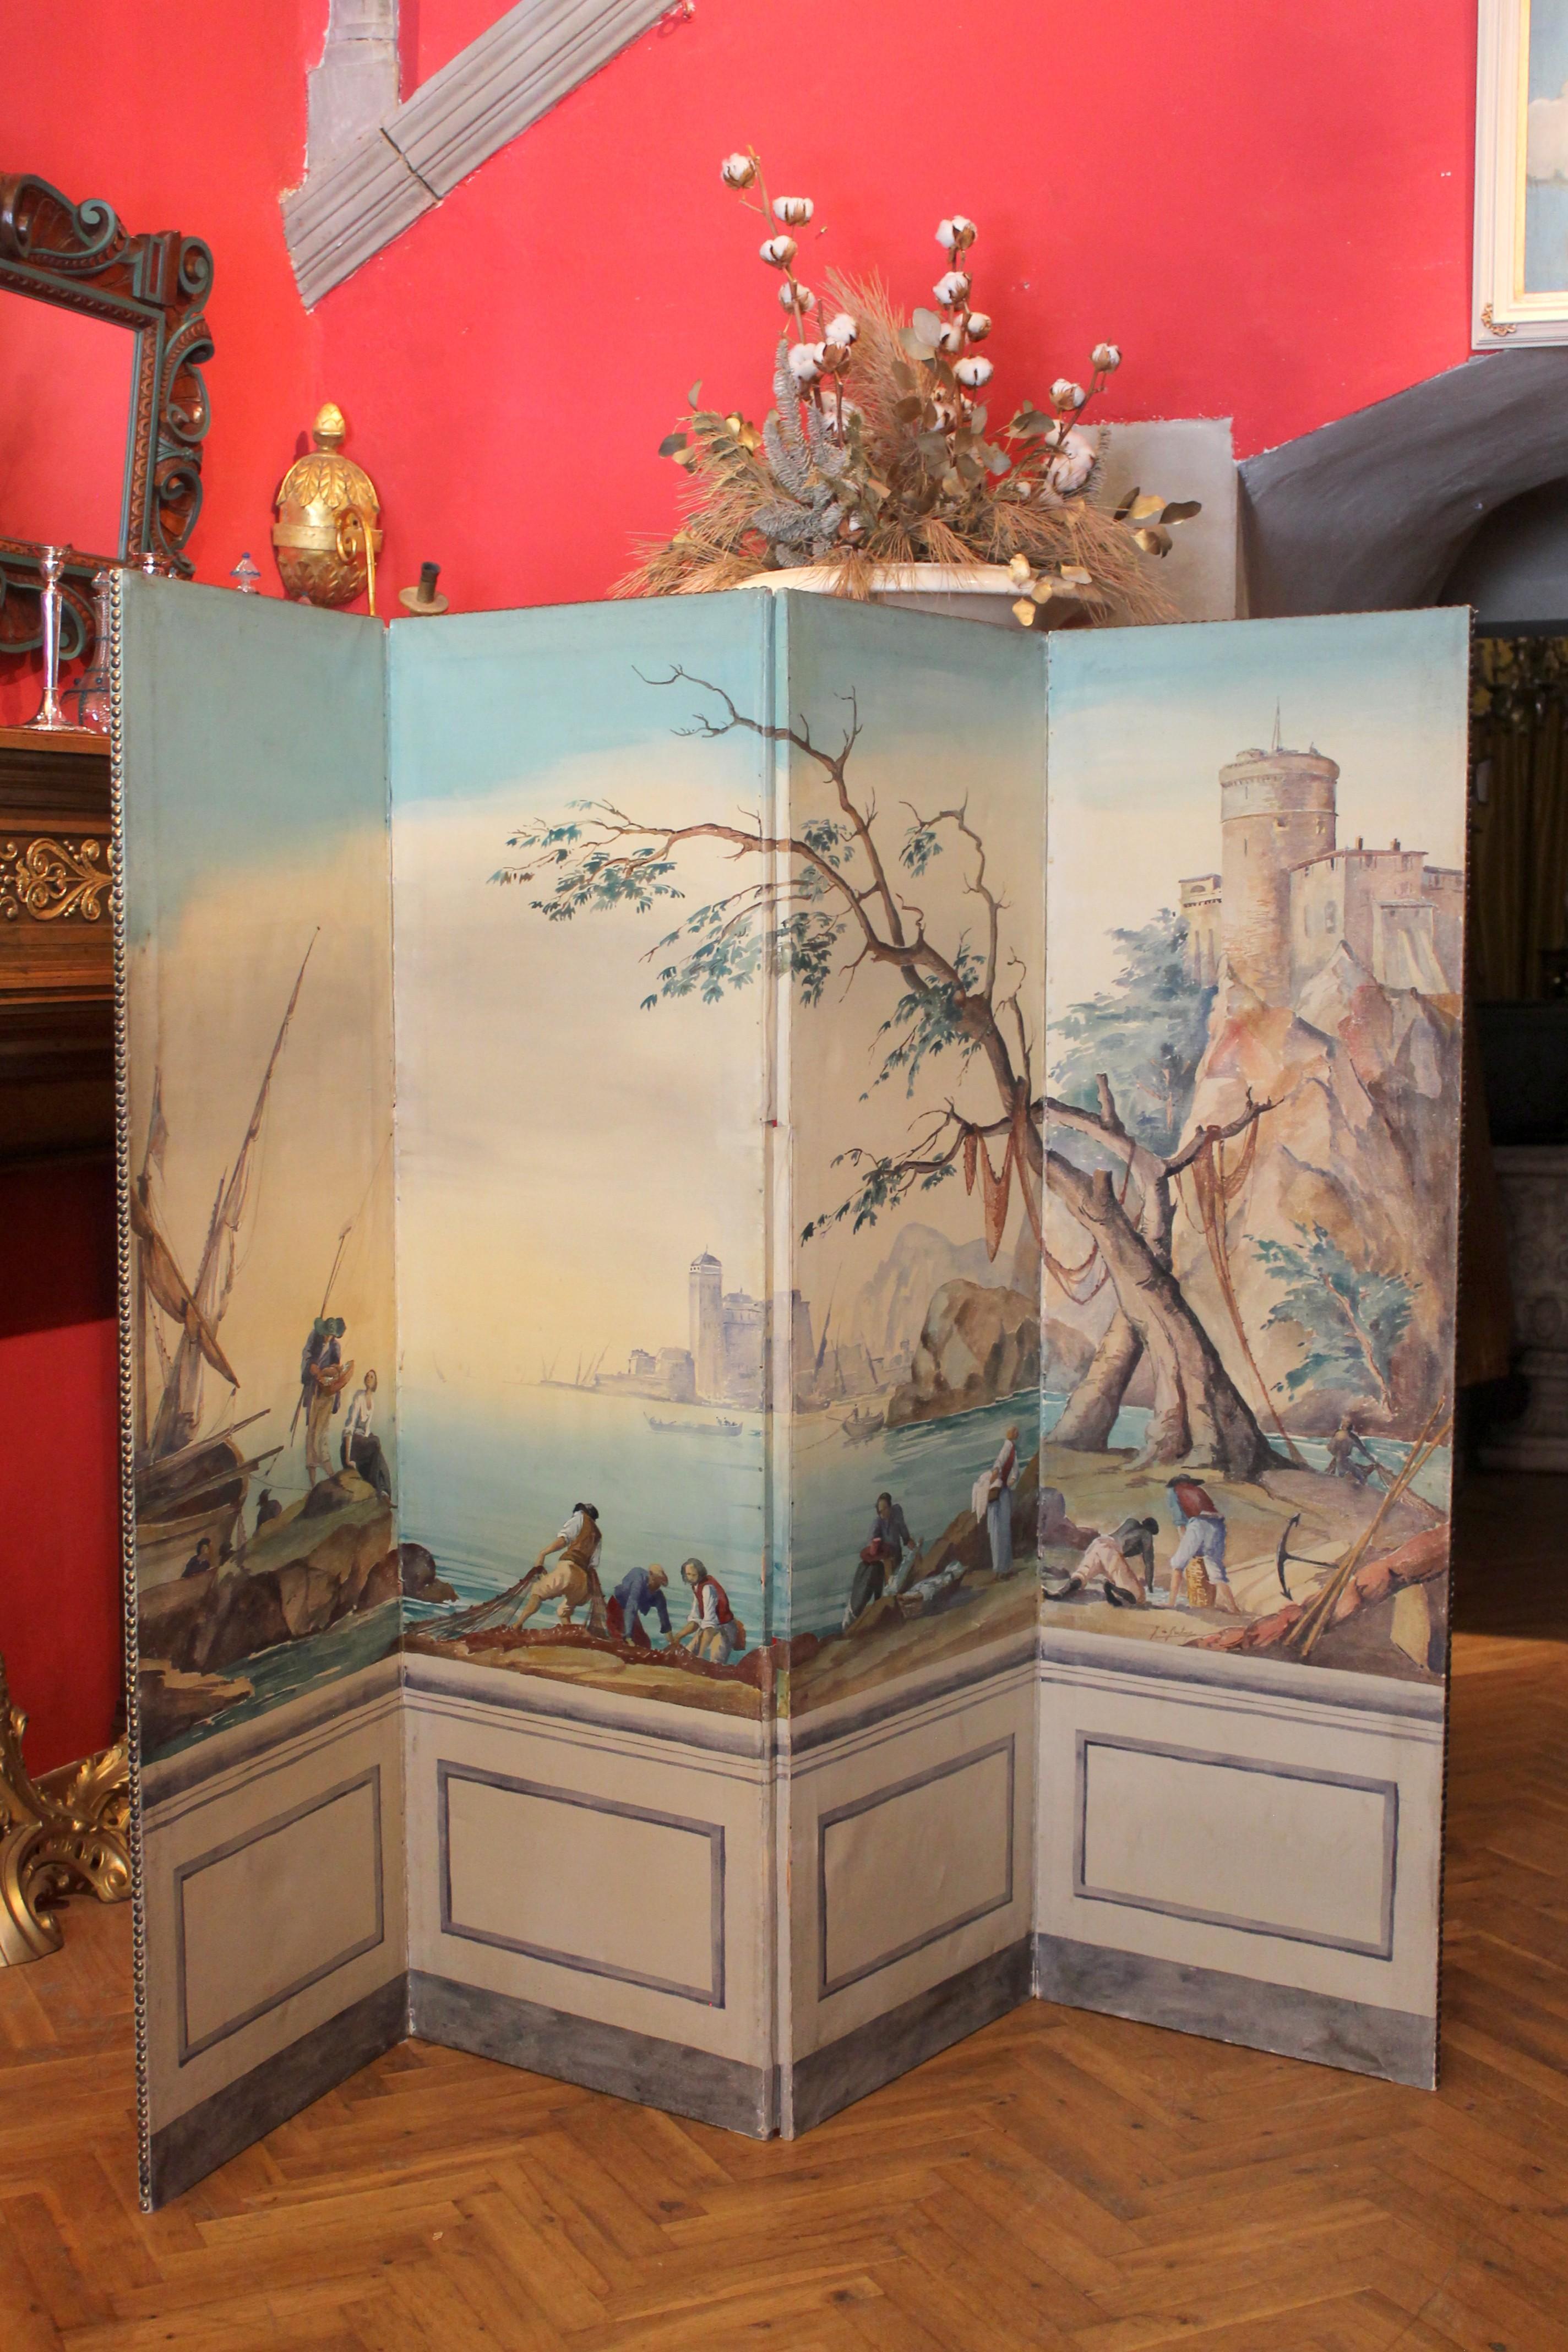 This French early 20th Century folding screen is made up of four canvases entirely painted with textured tempera featuring a marine landscape view in full Louis XV style, reminiscences of romantic atmospheres with certain moods from the past.
The